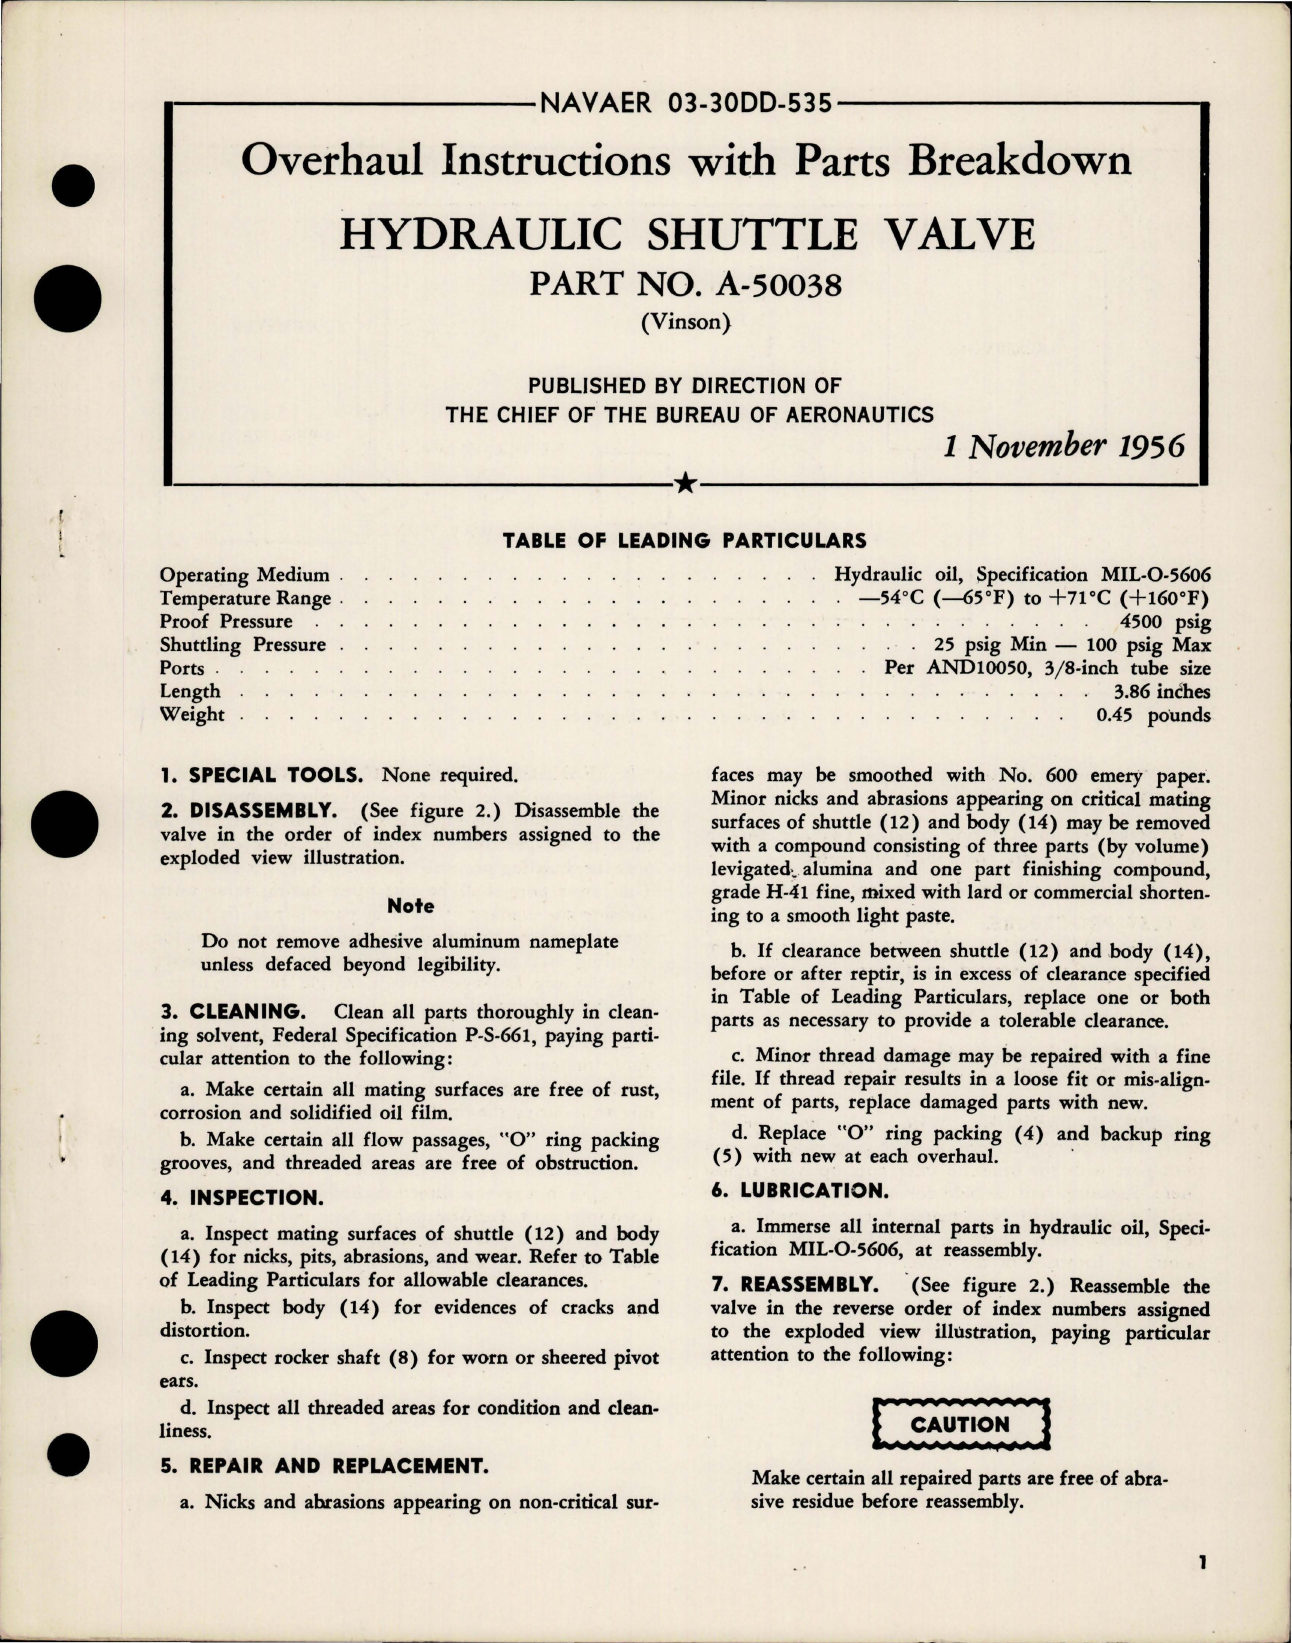 Sample page 1 from AirCorps Library document: Overhaul Instructions with Parts for Hydraulic Shuttle Valve - Part A-50038